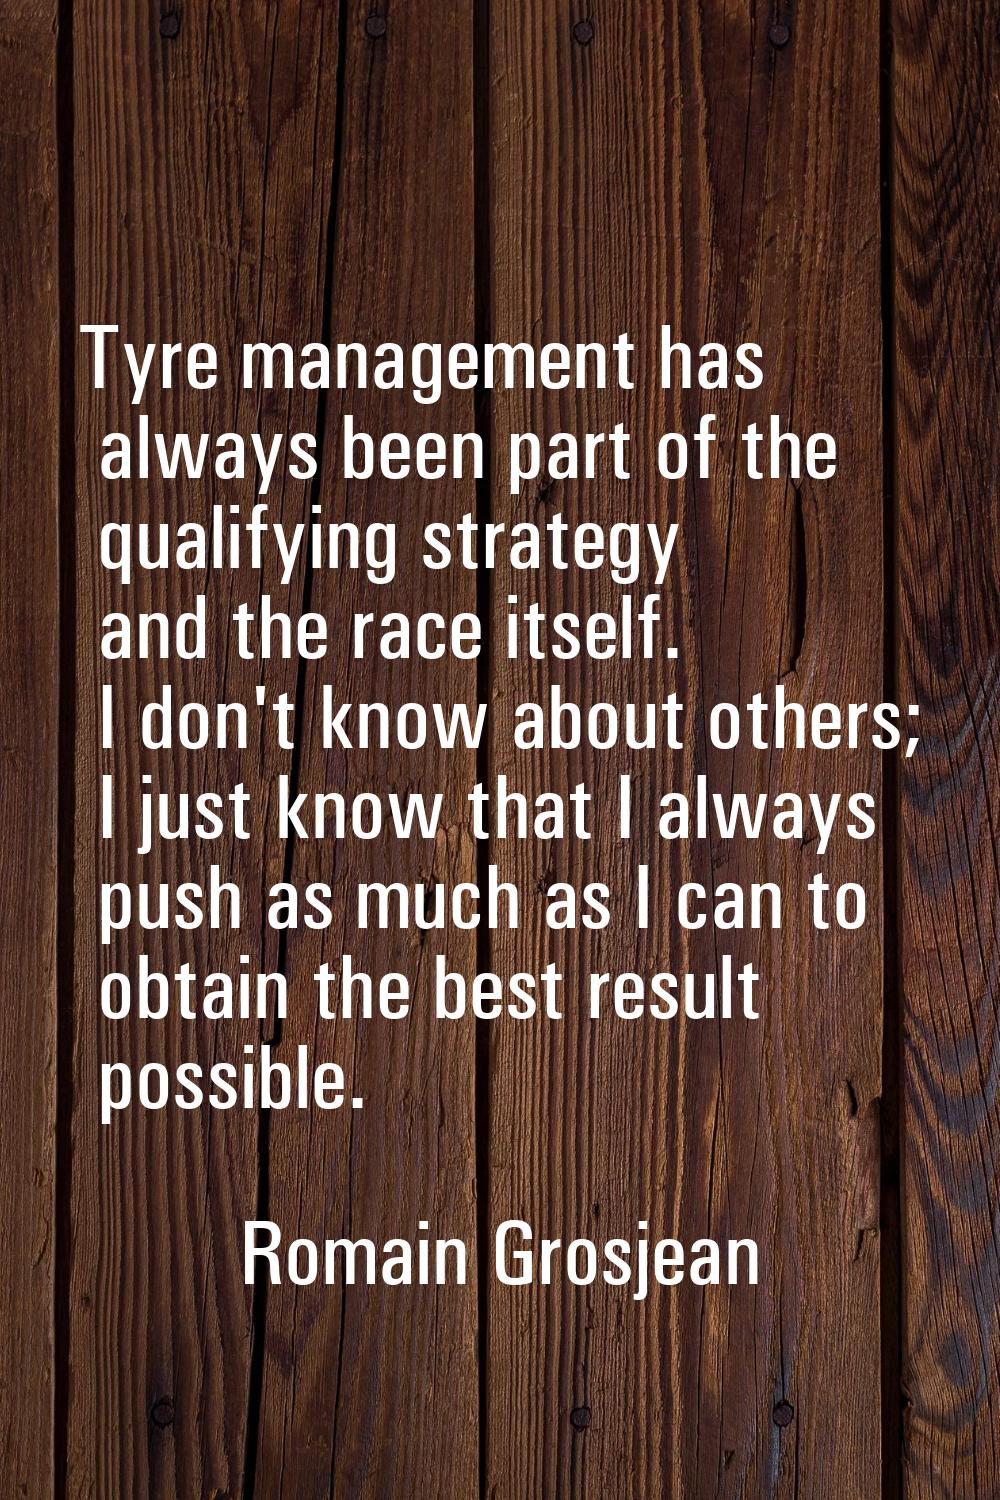 Tyre management has always been part of the qualifying strategy and the race itself. I don't know a